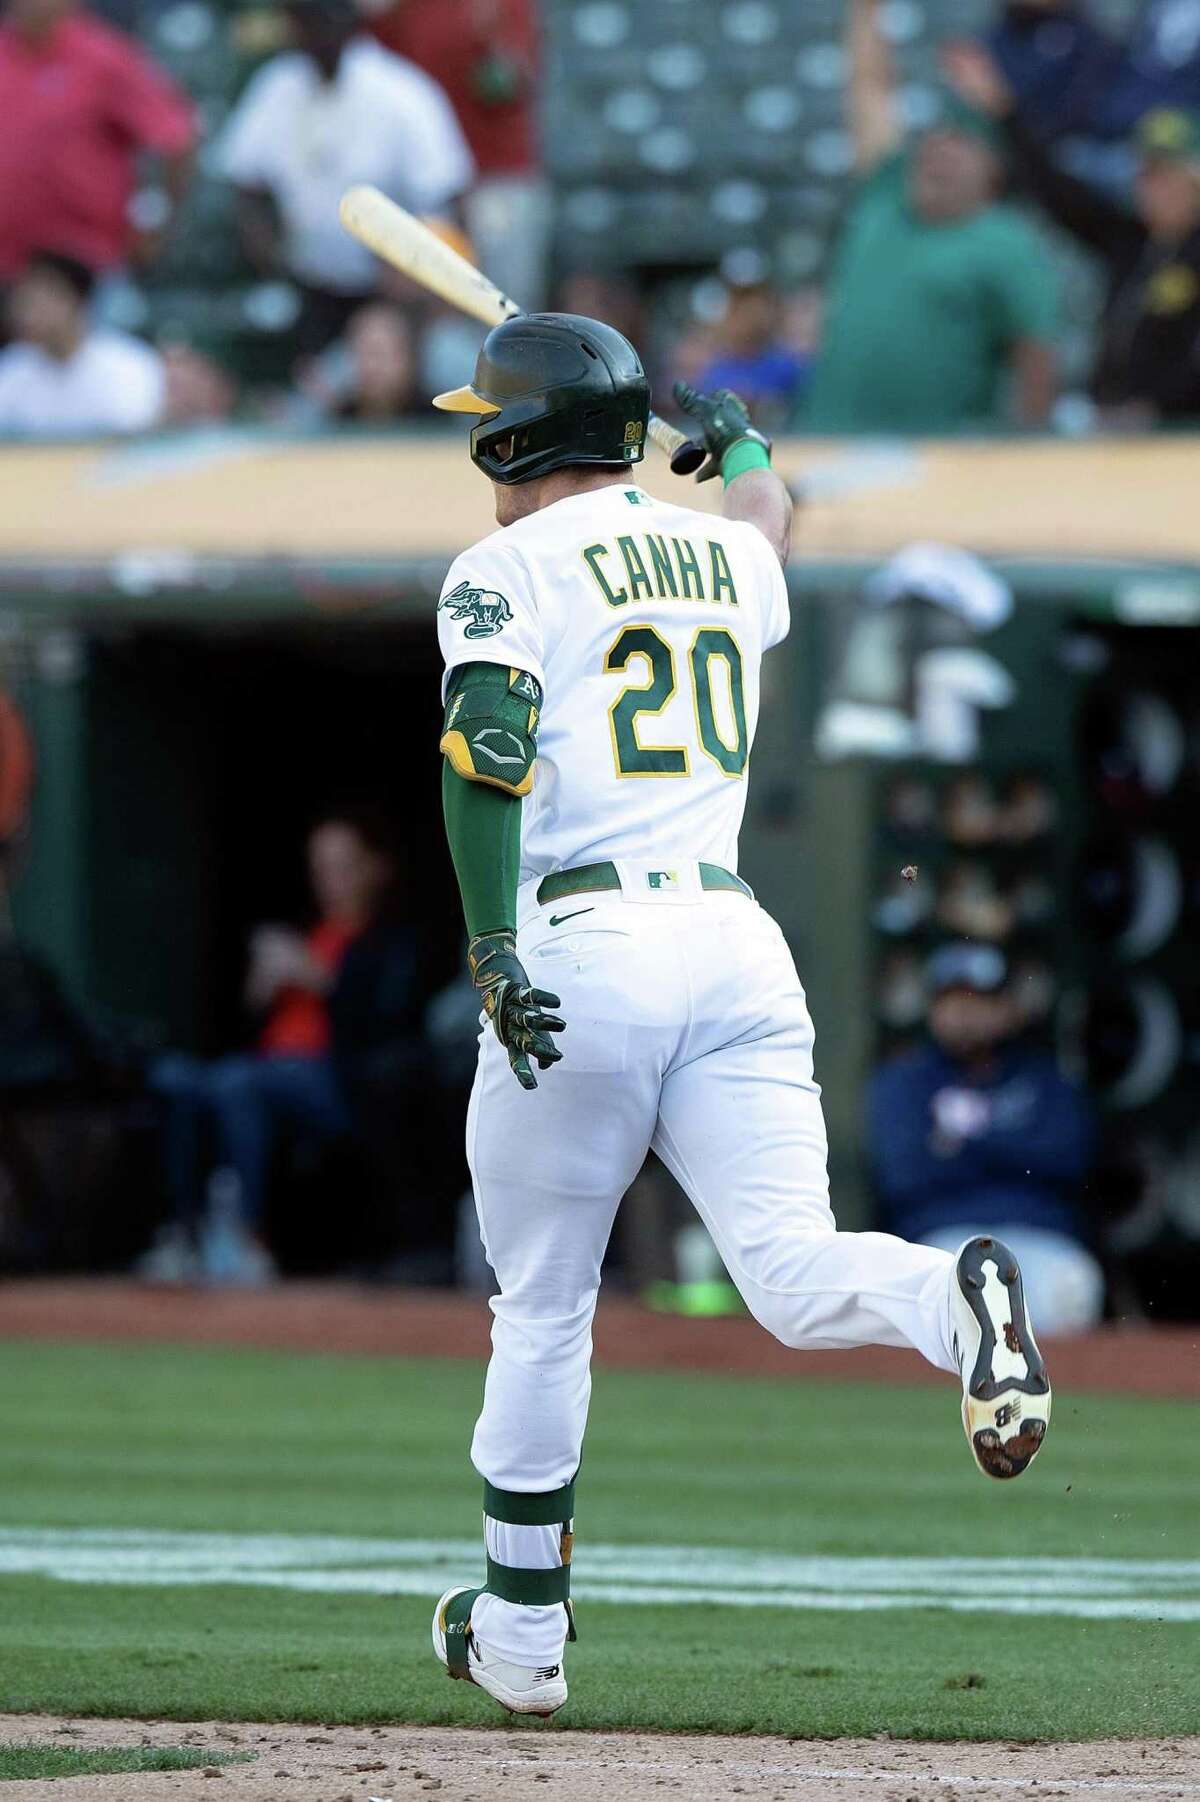 OAKLAND, CALIFORNIA - SEPTEMBER 26: Mark Canha #20 of the Oakland Athletics flips his bat after hitting a walk-off single against the Houston Astros in the ninth inning at RingCentral Coliseum on September 26, 2021 in Oakland, California. The Athletics won 4-3. (Photo by Jason O. Watson/Getty Images)